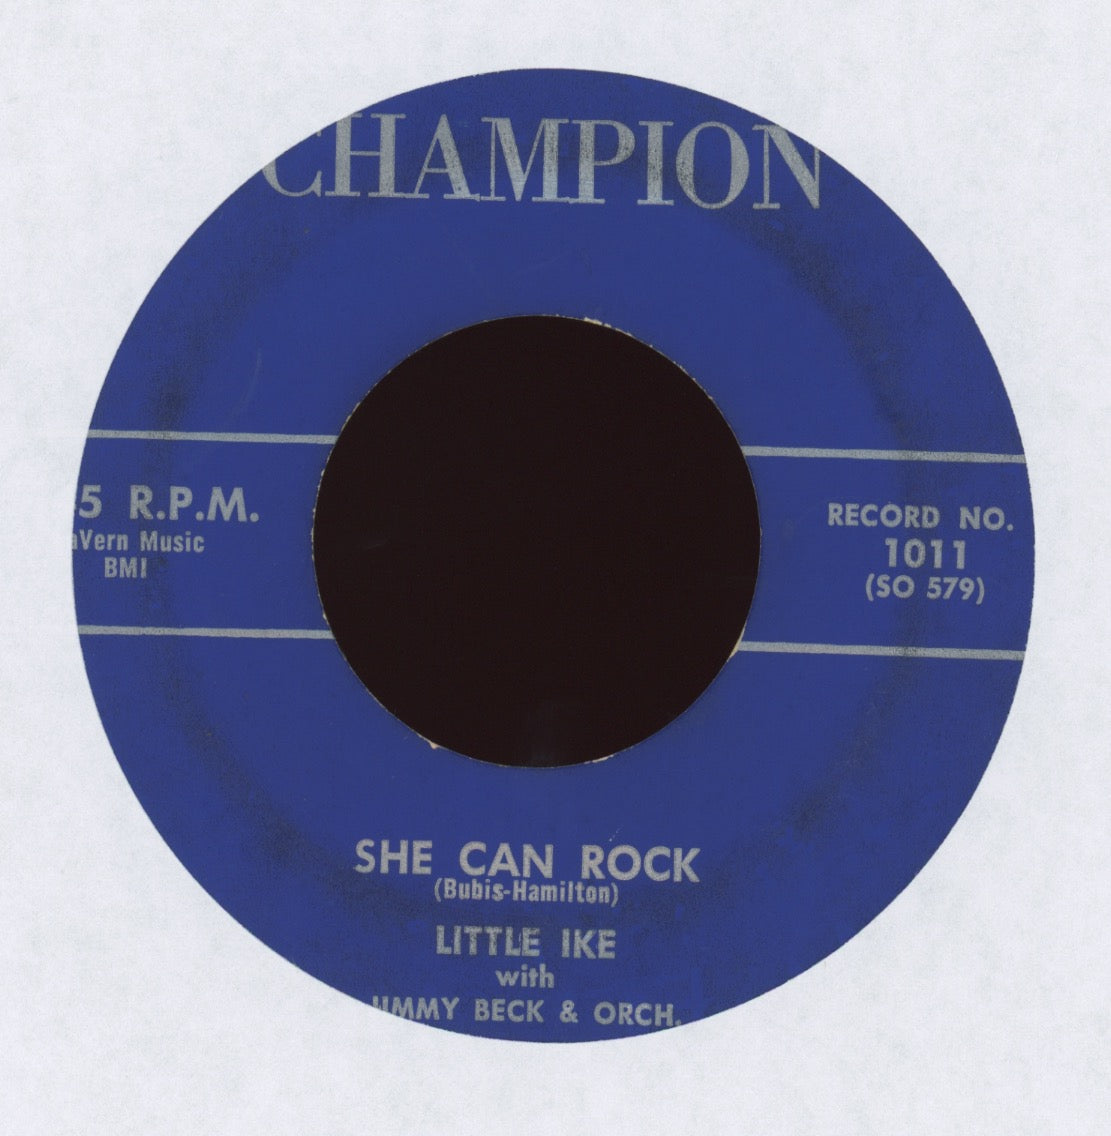 Little Ike - She Can Rock on Champion